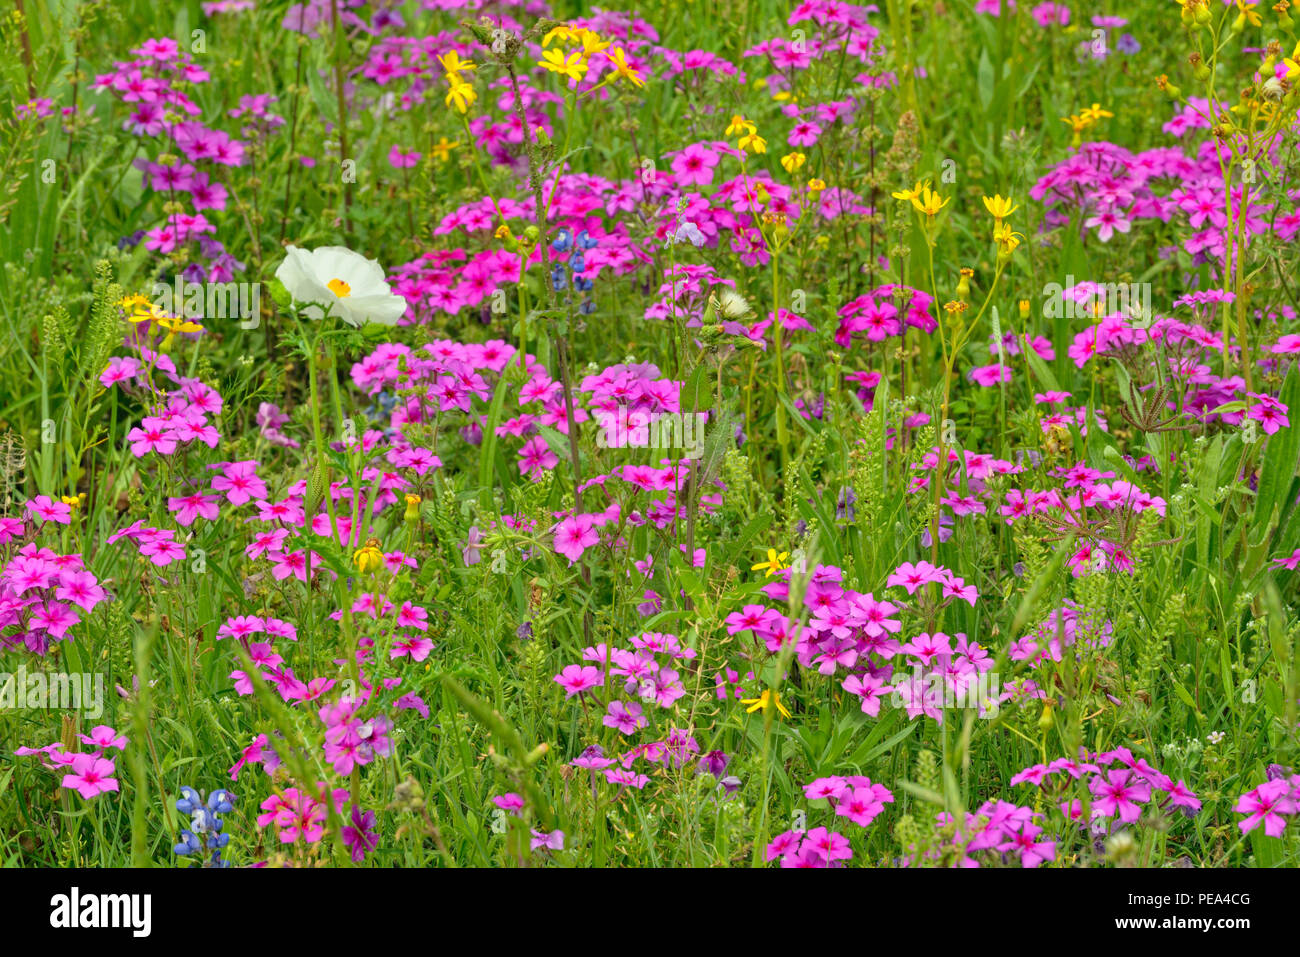 Texas wildflowers in bloom- Prickly poppies (Argemone spp.) and phlox, Floresville, Texas, USA Stock Photo